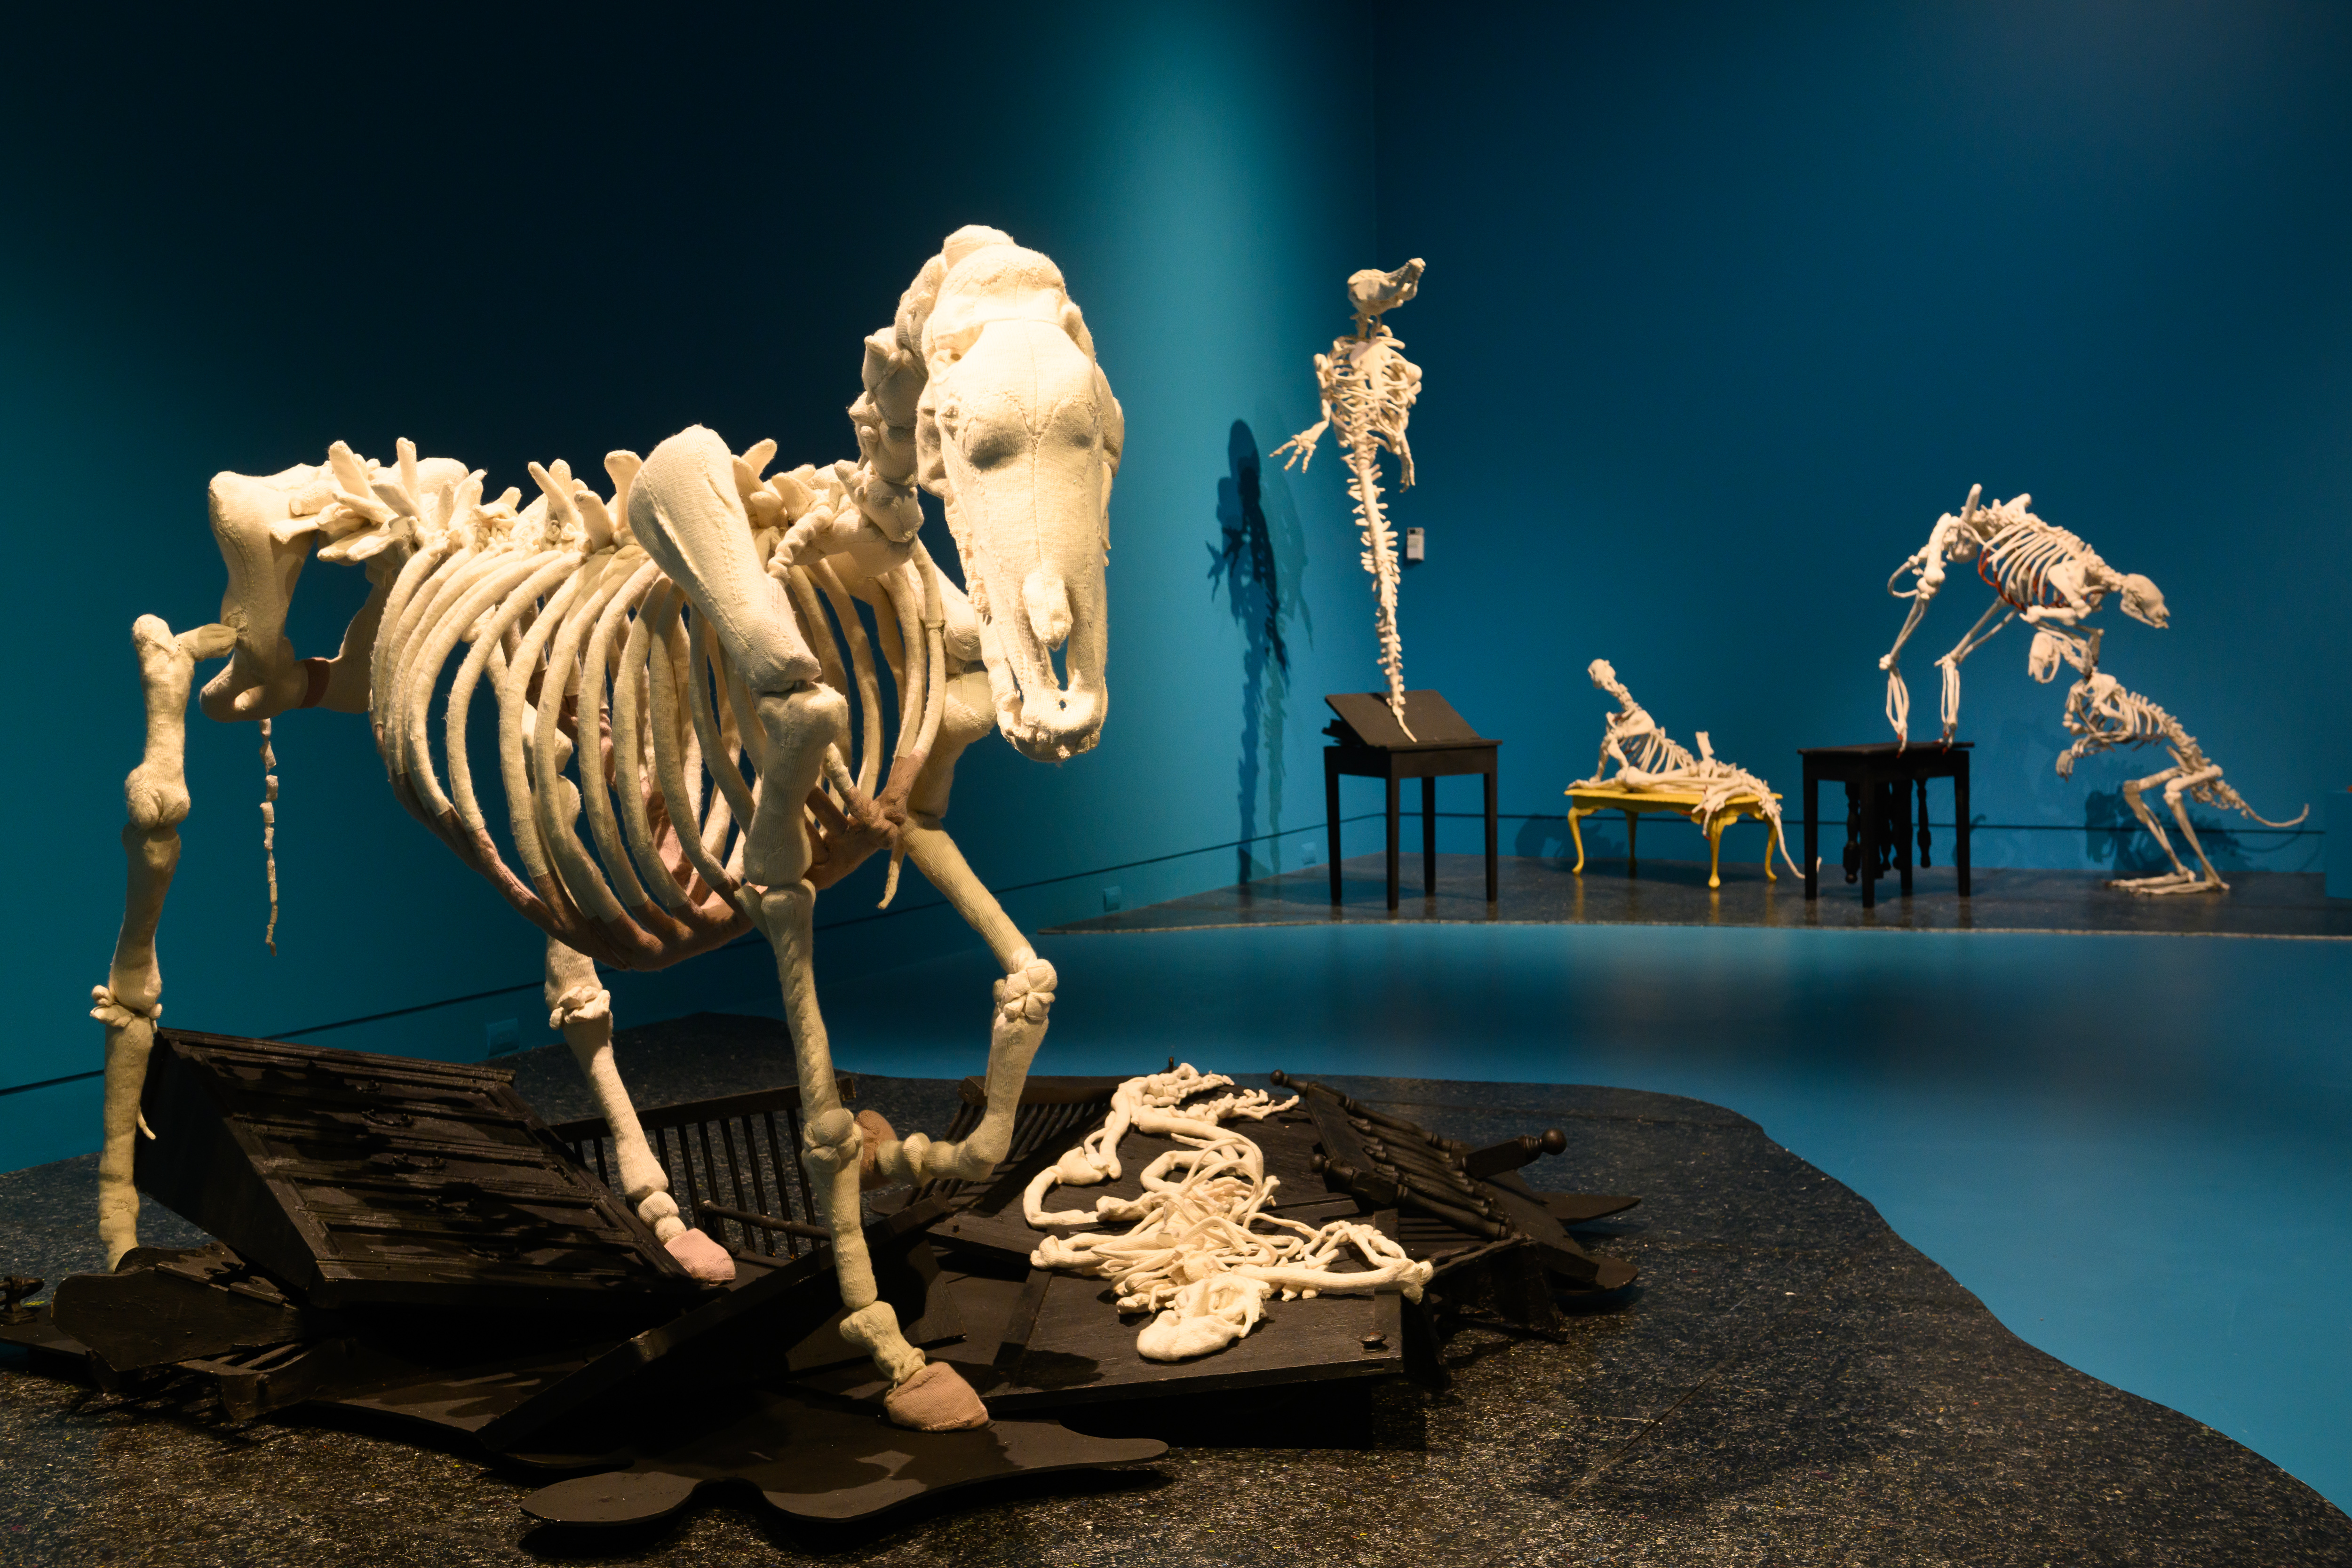 A life-sized skeleton of a horse knitted by Michele Beevors. Its hoof is raised above a limp knitted skeleton of a human. Both surrounded by second-hand furniture that has been painted with tar paint. The floors of the Gallery are painted a deep ocean blue and the artworks are on a composite black board.